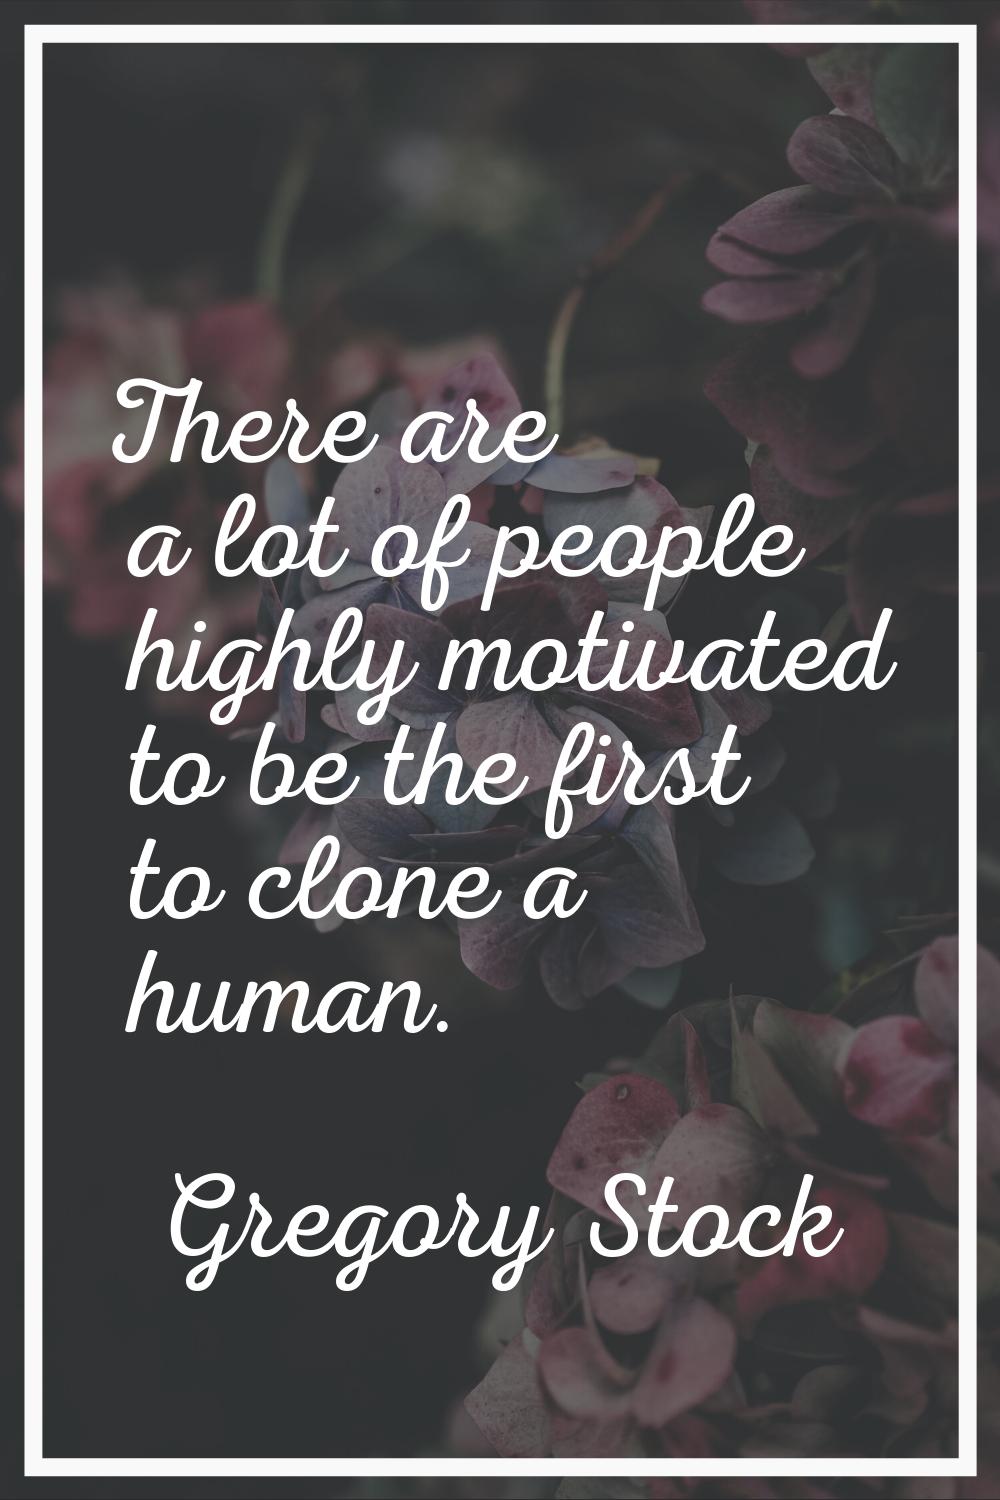 There are a lot of people highly motivated to be the first to clone a human.